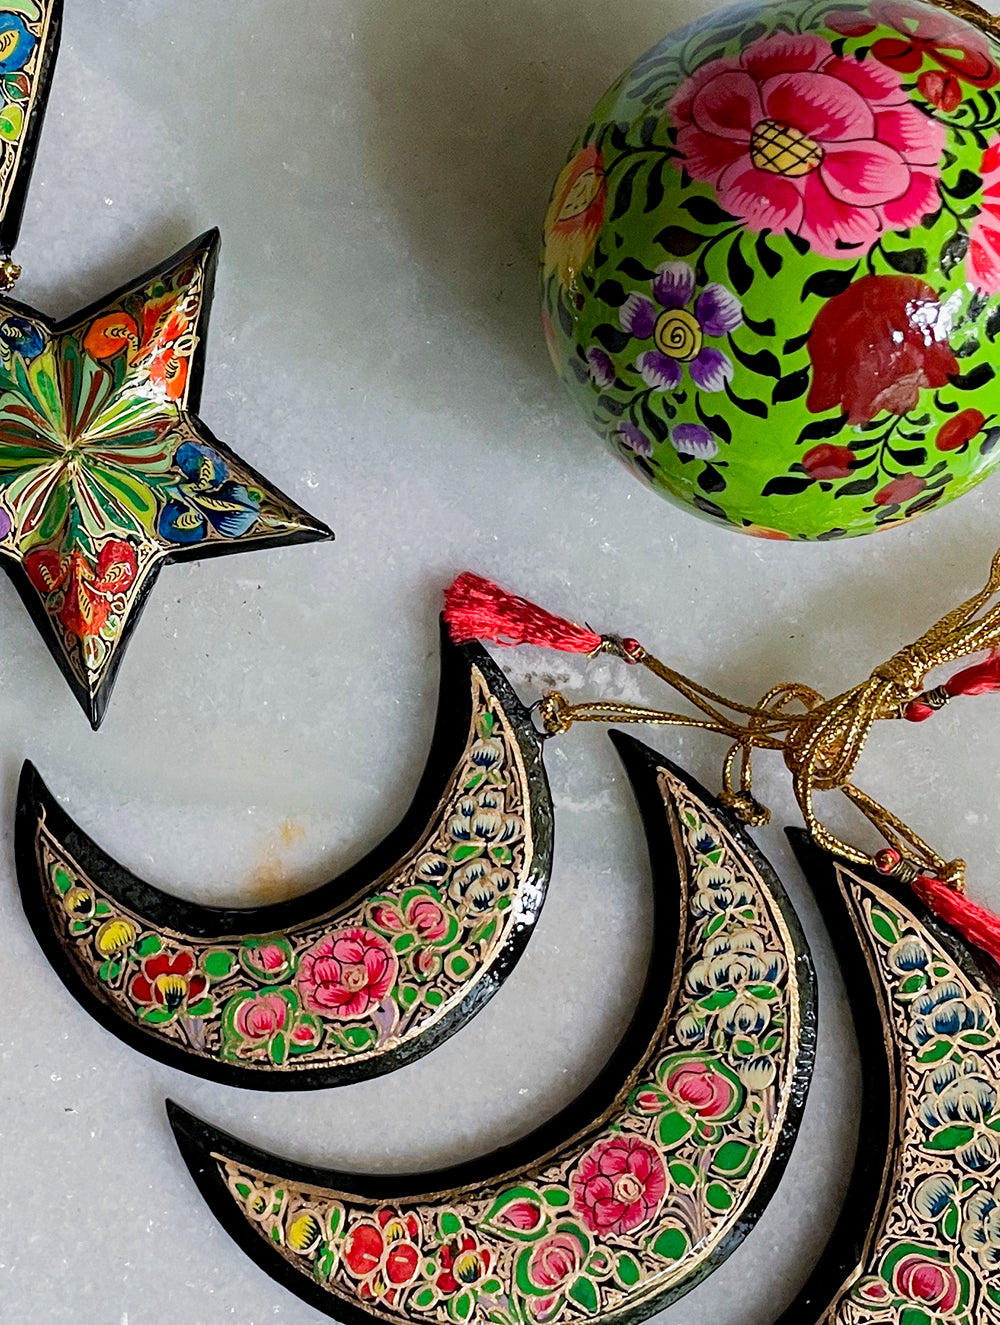 Load image into Gallery viewer, Kashmiri Art Xmas Decorations - Set of 7 (3 Stars, 3 Moons, 1 Bauble) 